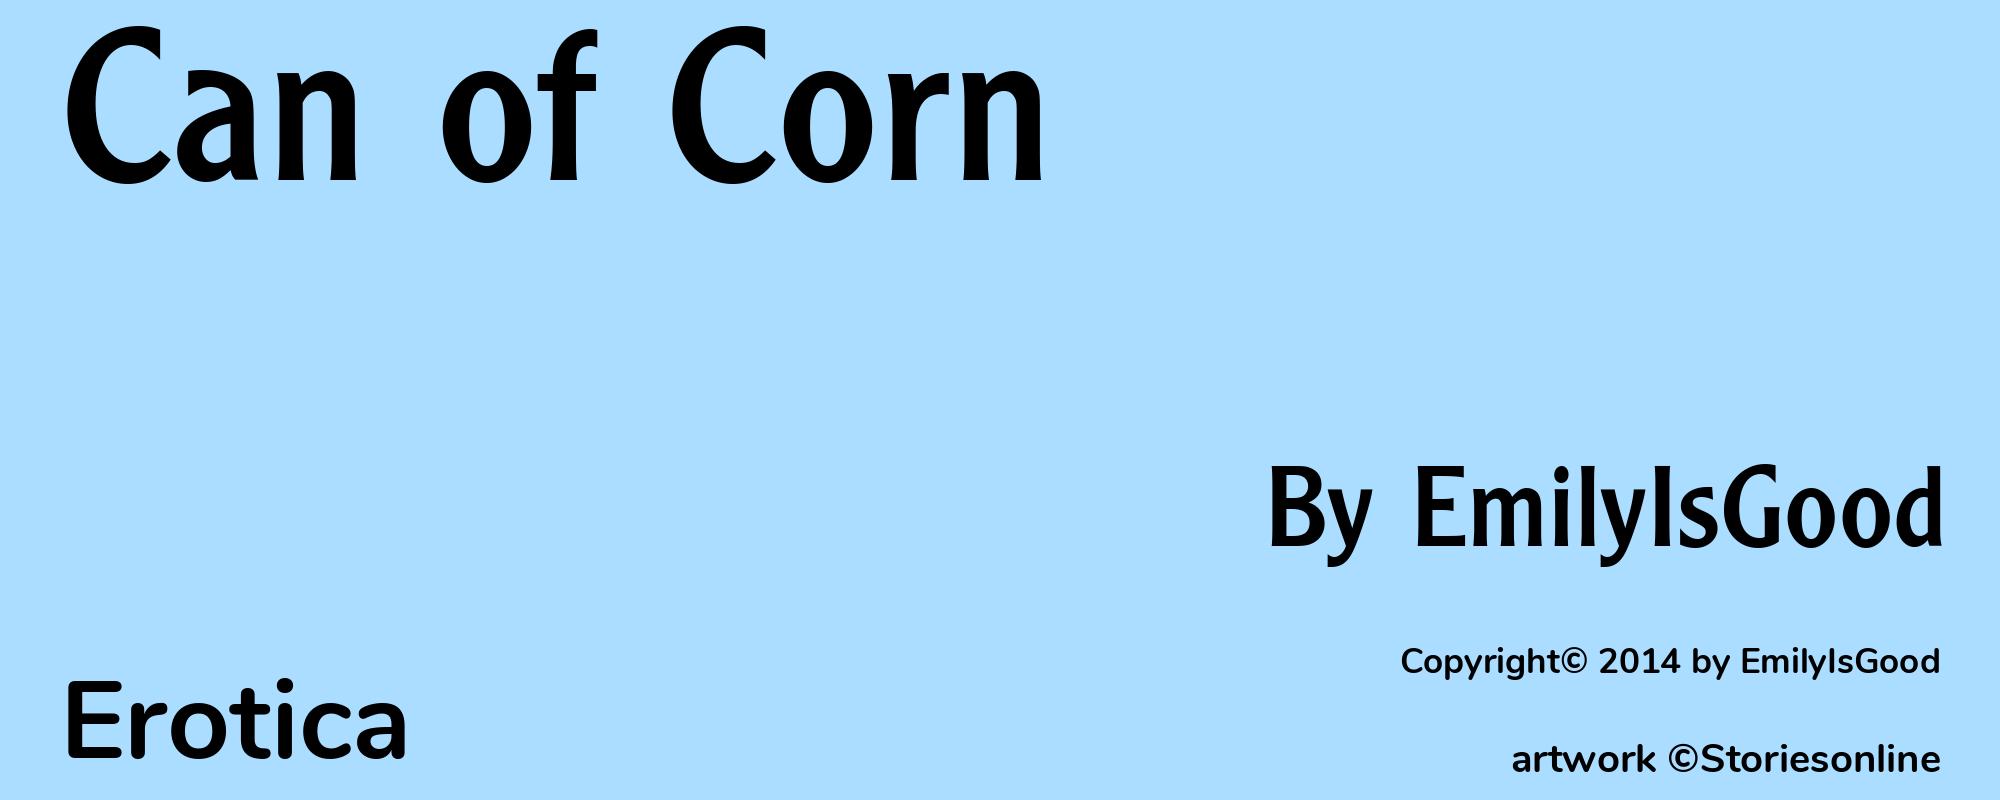 Can of Corn - Cover